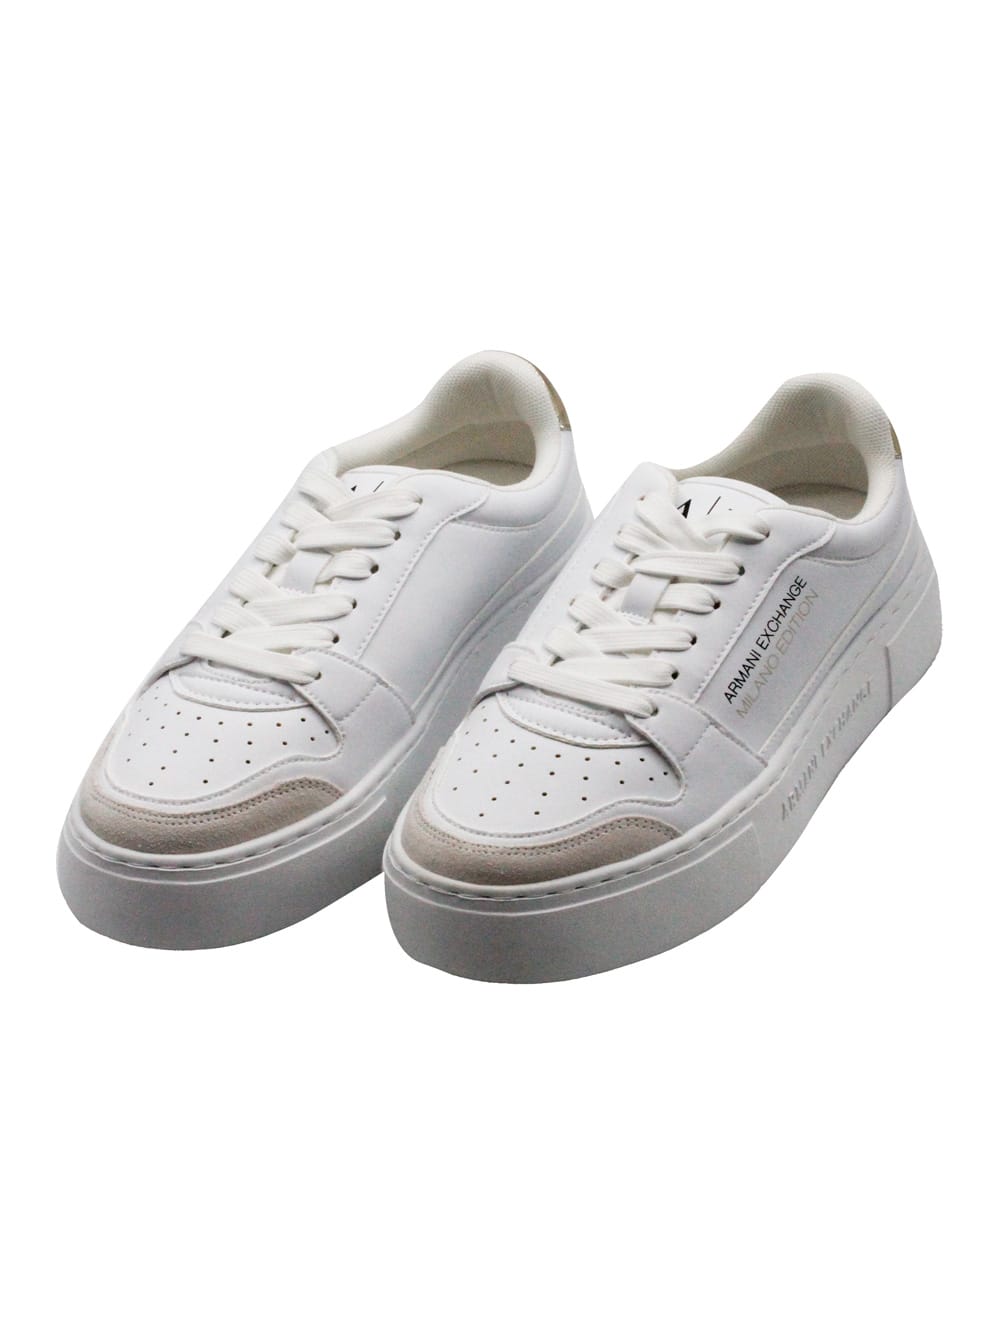 Leather Sneakers With Matching Box Sole And Lace Closure. Small Golden Rear Logo And Side Writing